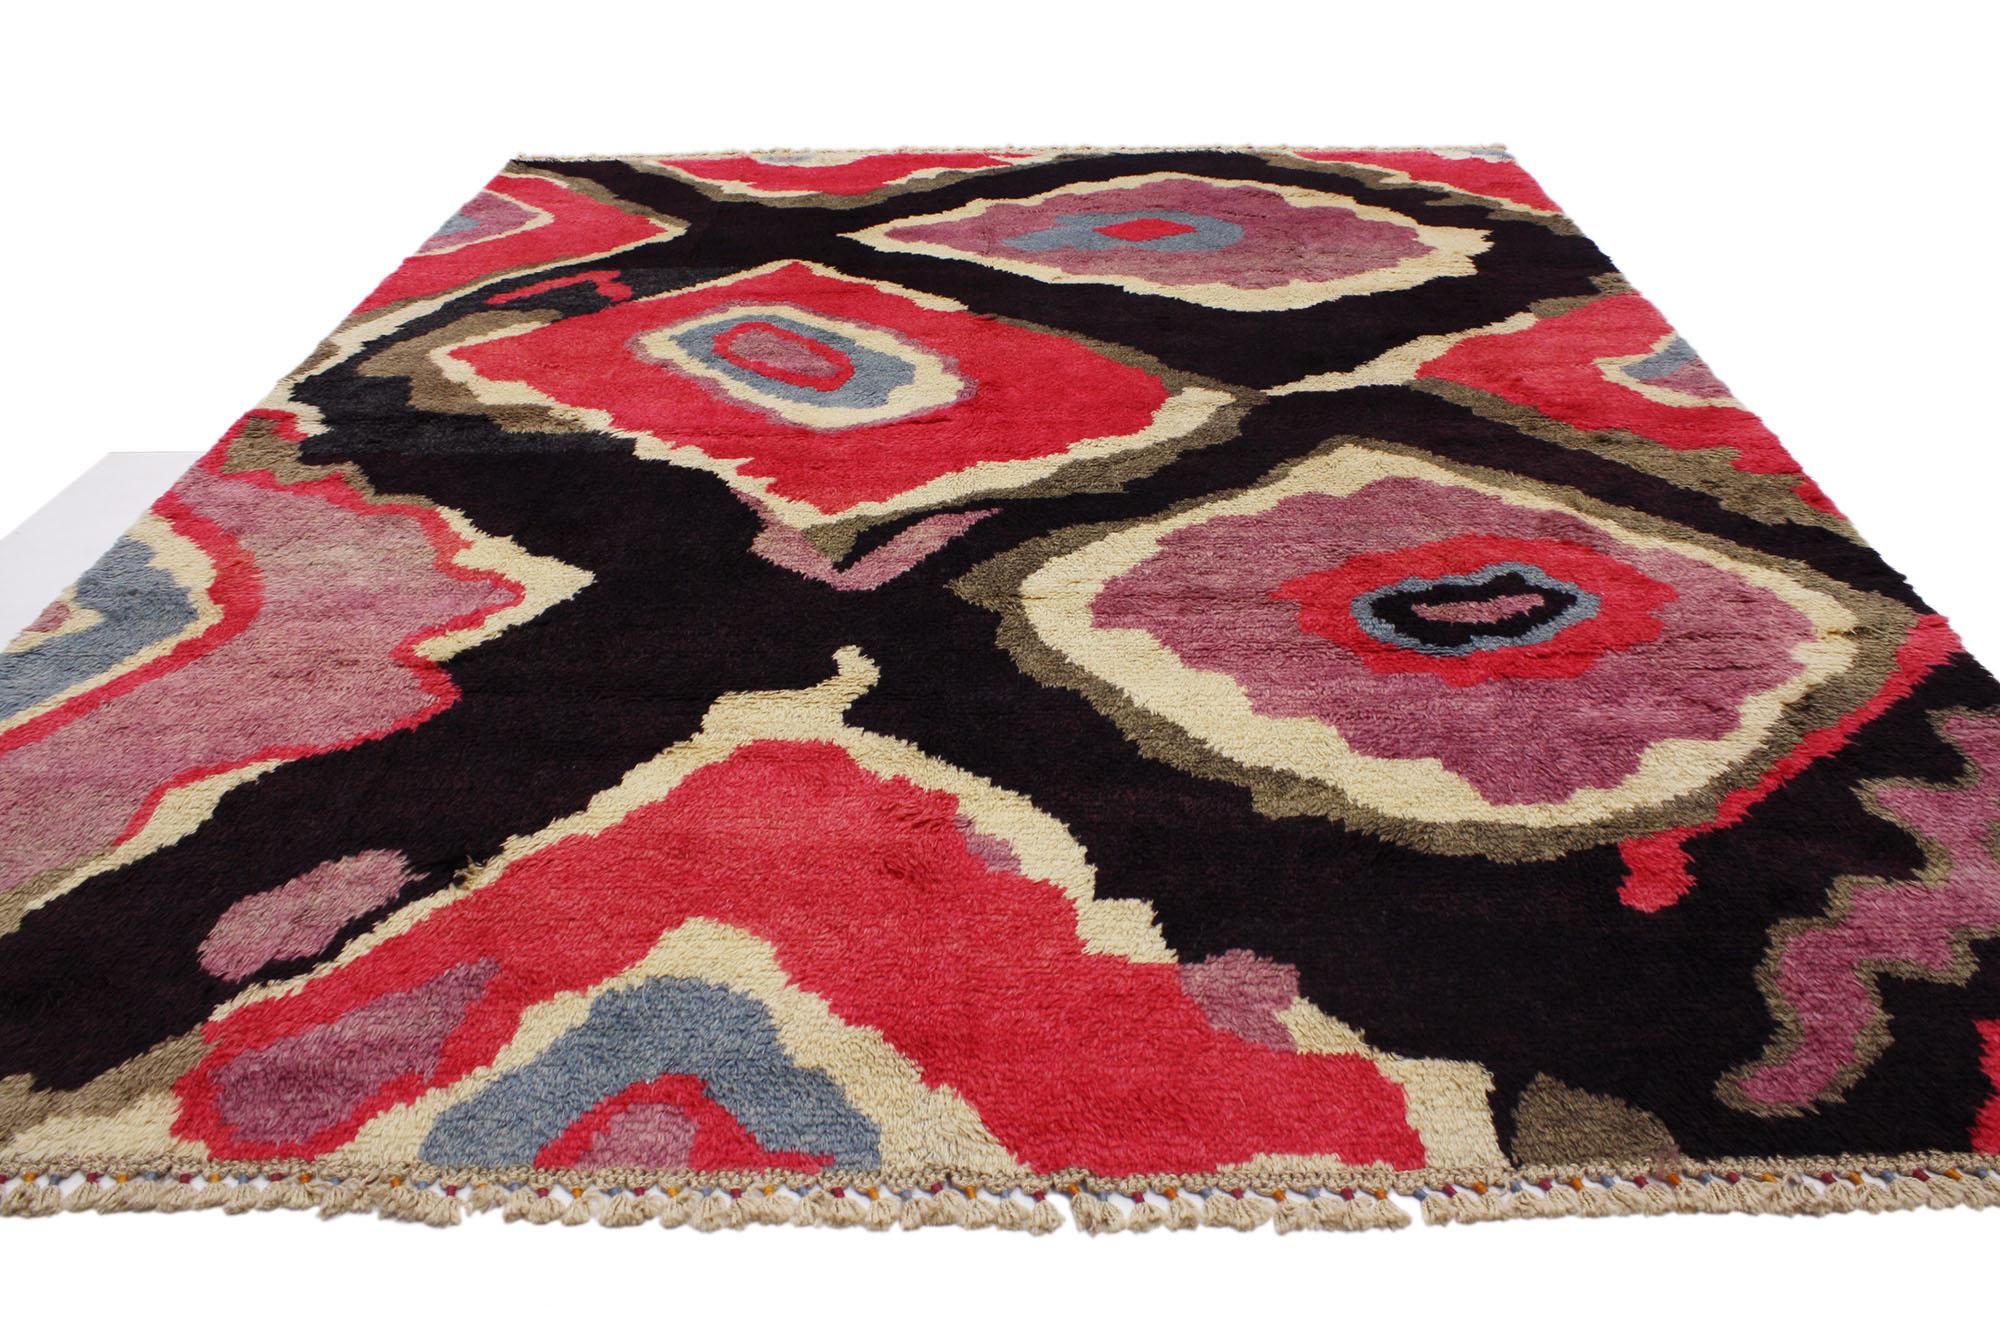 Space Age New Colorful Contemporary Turkish Tulu Shag Area Rug Inspired by Sonia Delaunay  For Sale